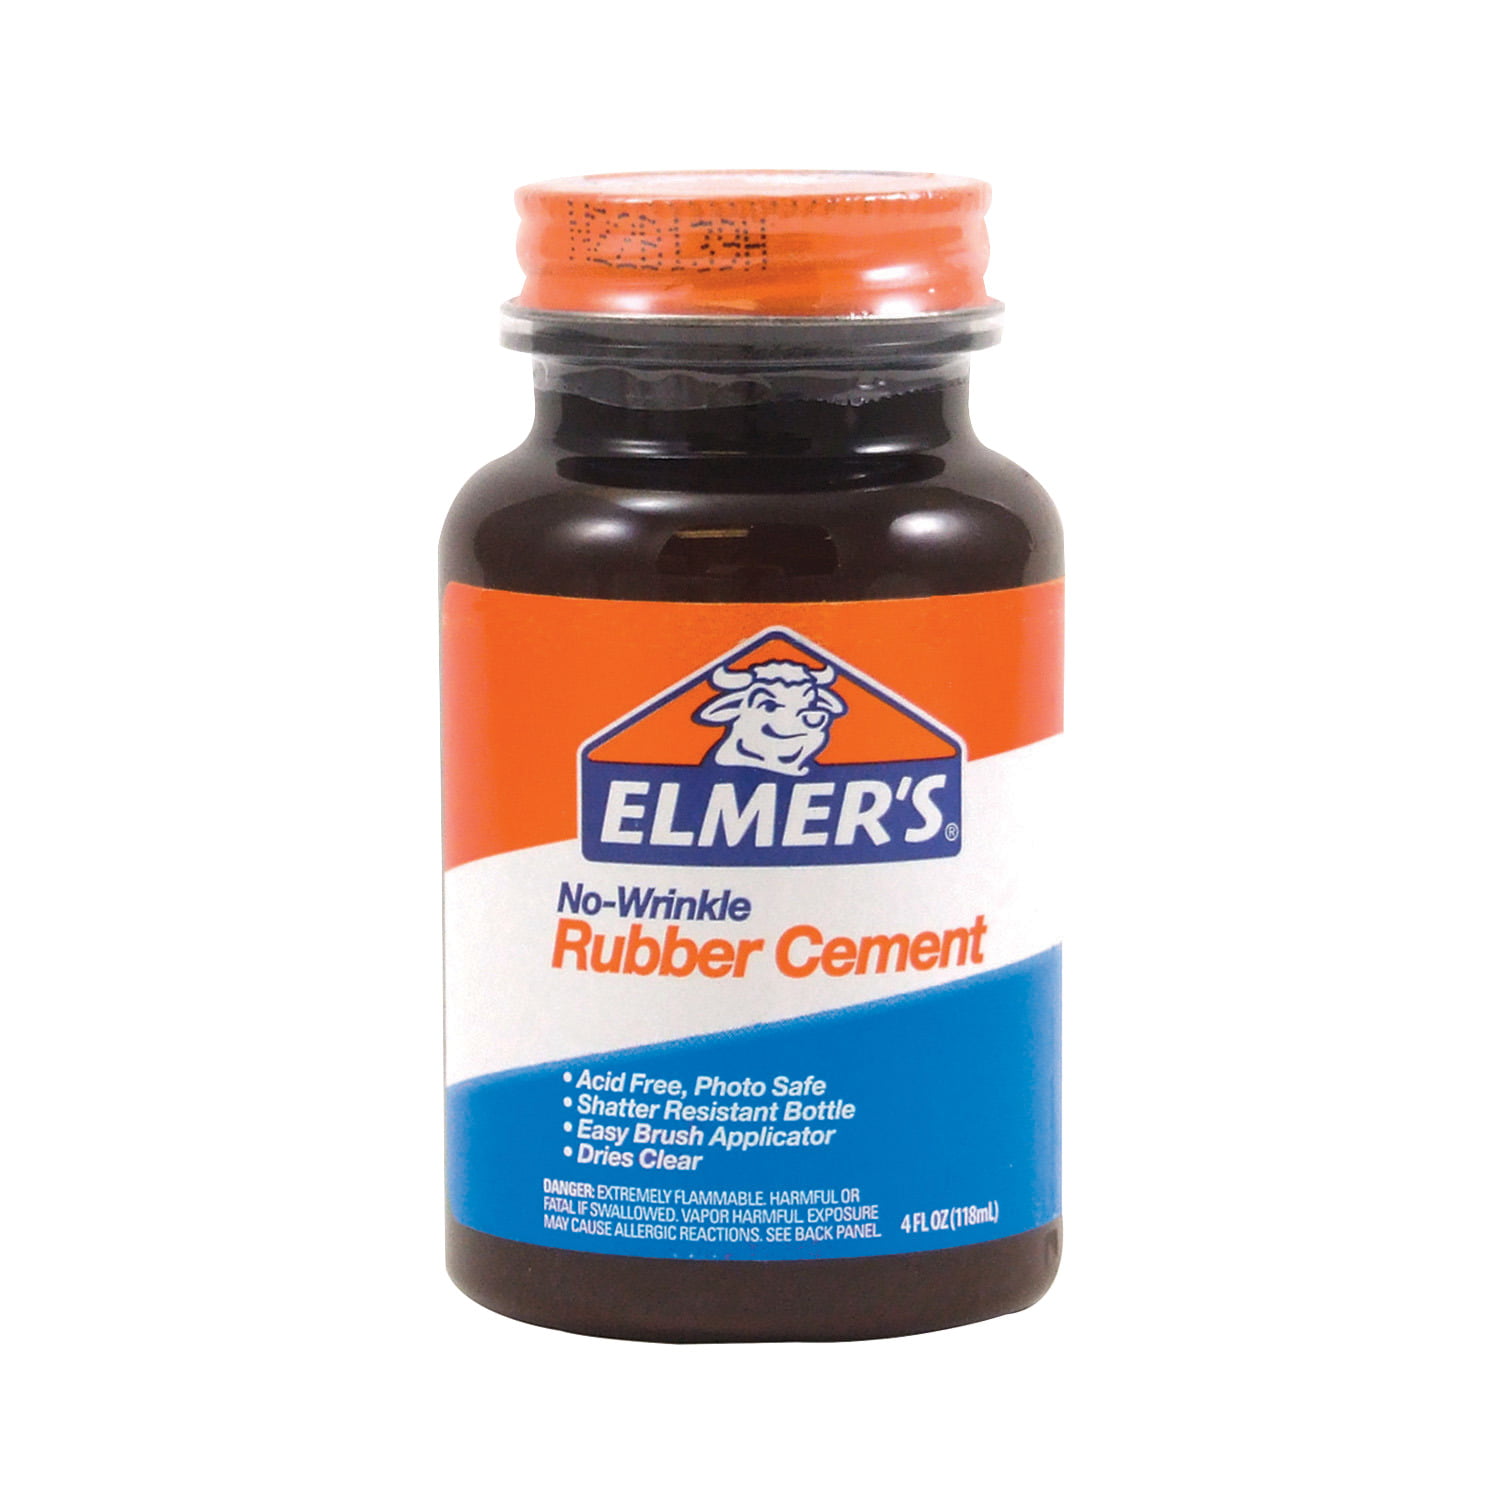 Elmer's No Wrinkle Rubber Cement with Brush in Cap, 4 Ounce Jar, Clear